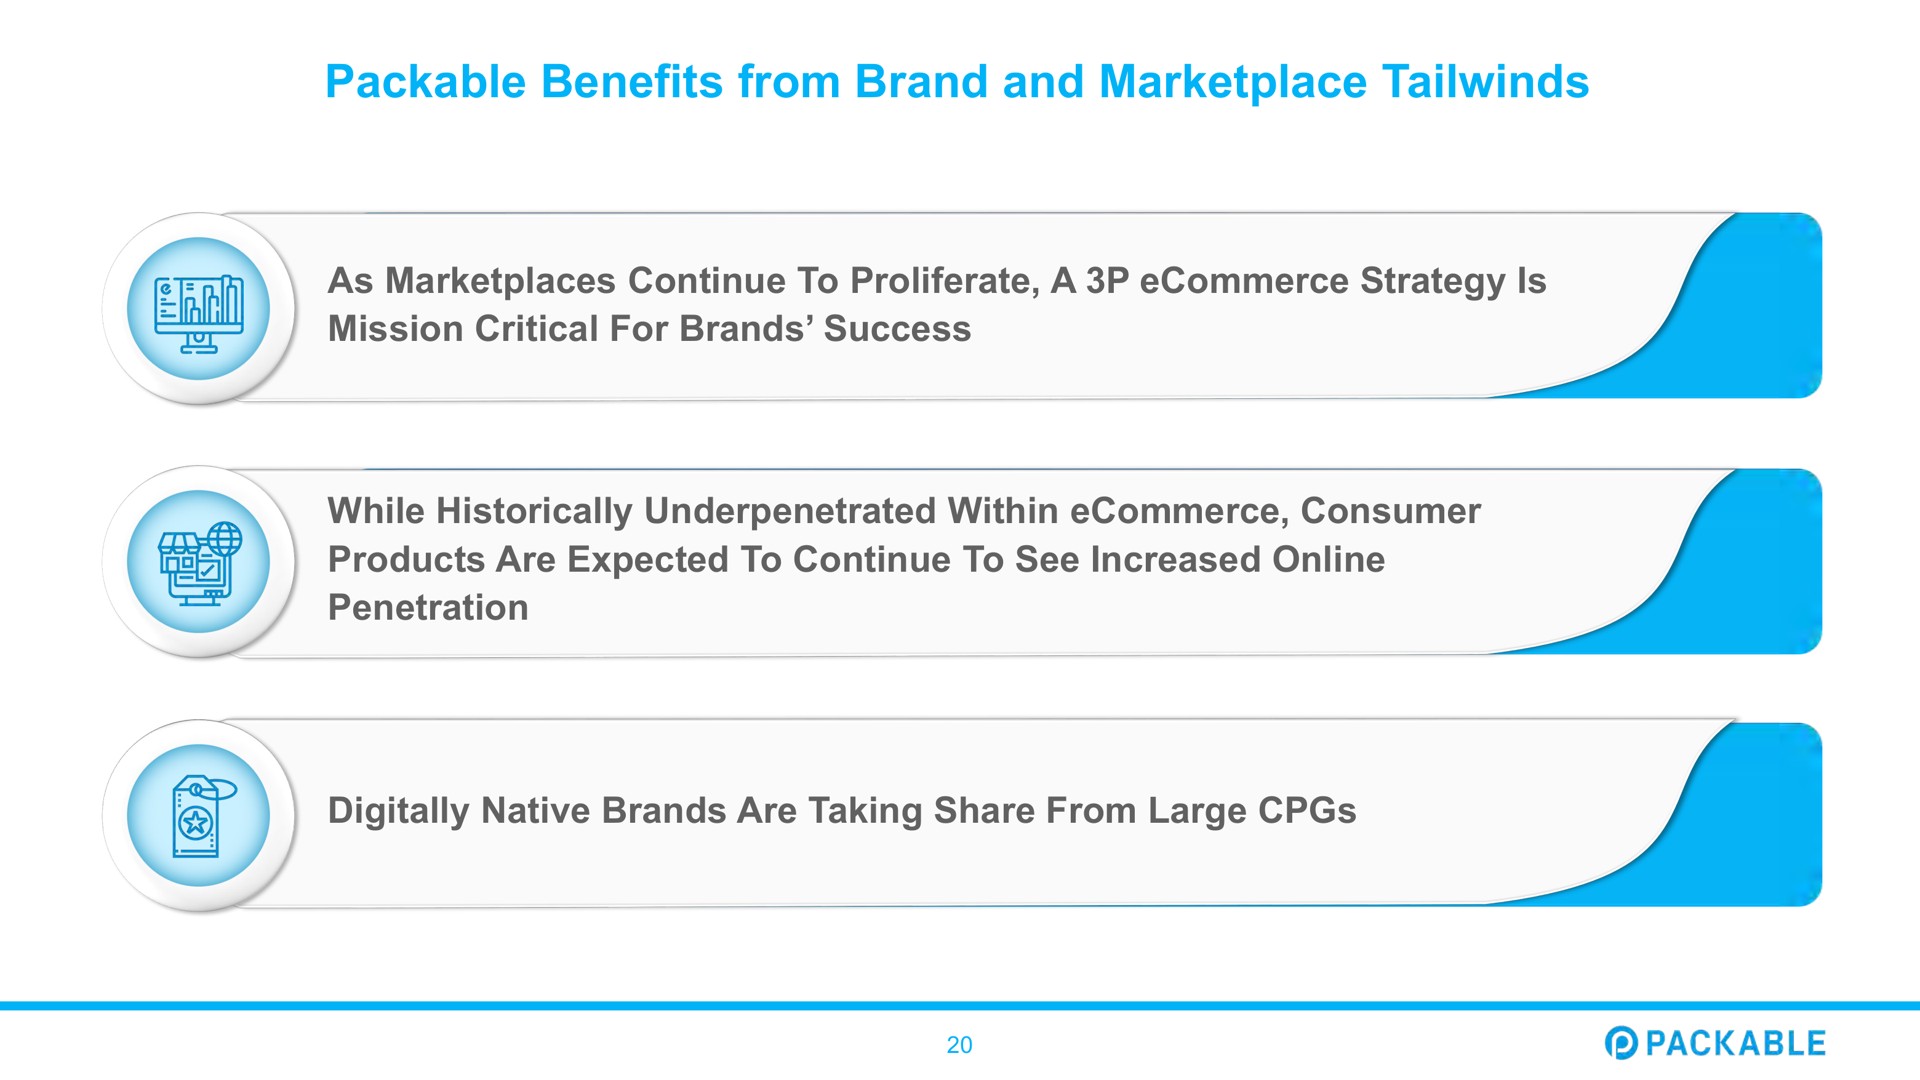 packable benefits from brand and as continue to proliferate a strategy is mission critical for brands success while historically within consumer products are expected to continue to see increased penetration digitally native brands are taking share from large a | Packable